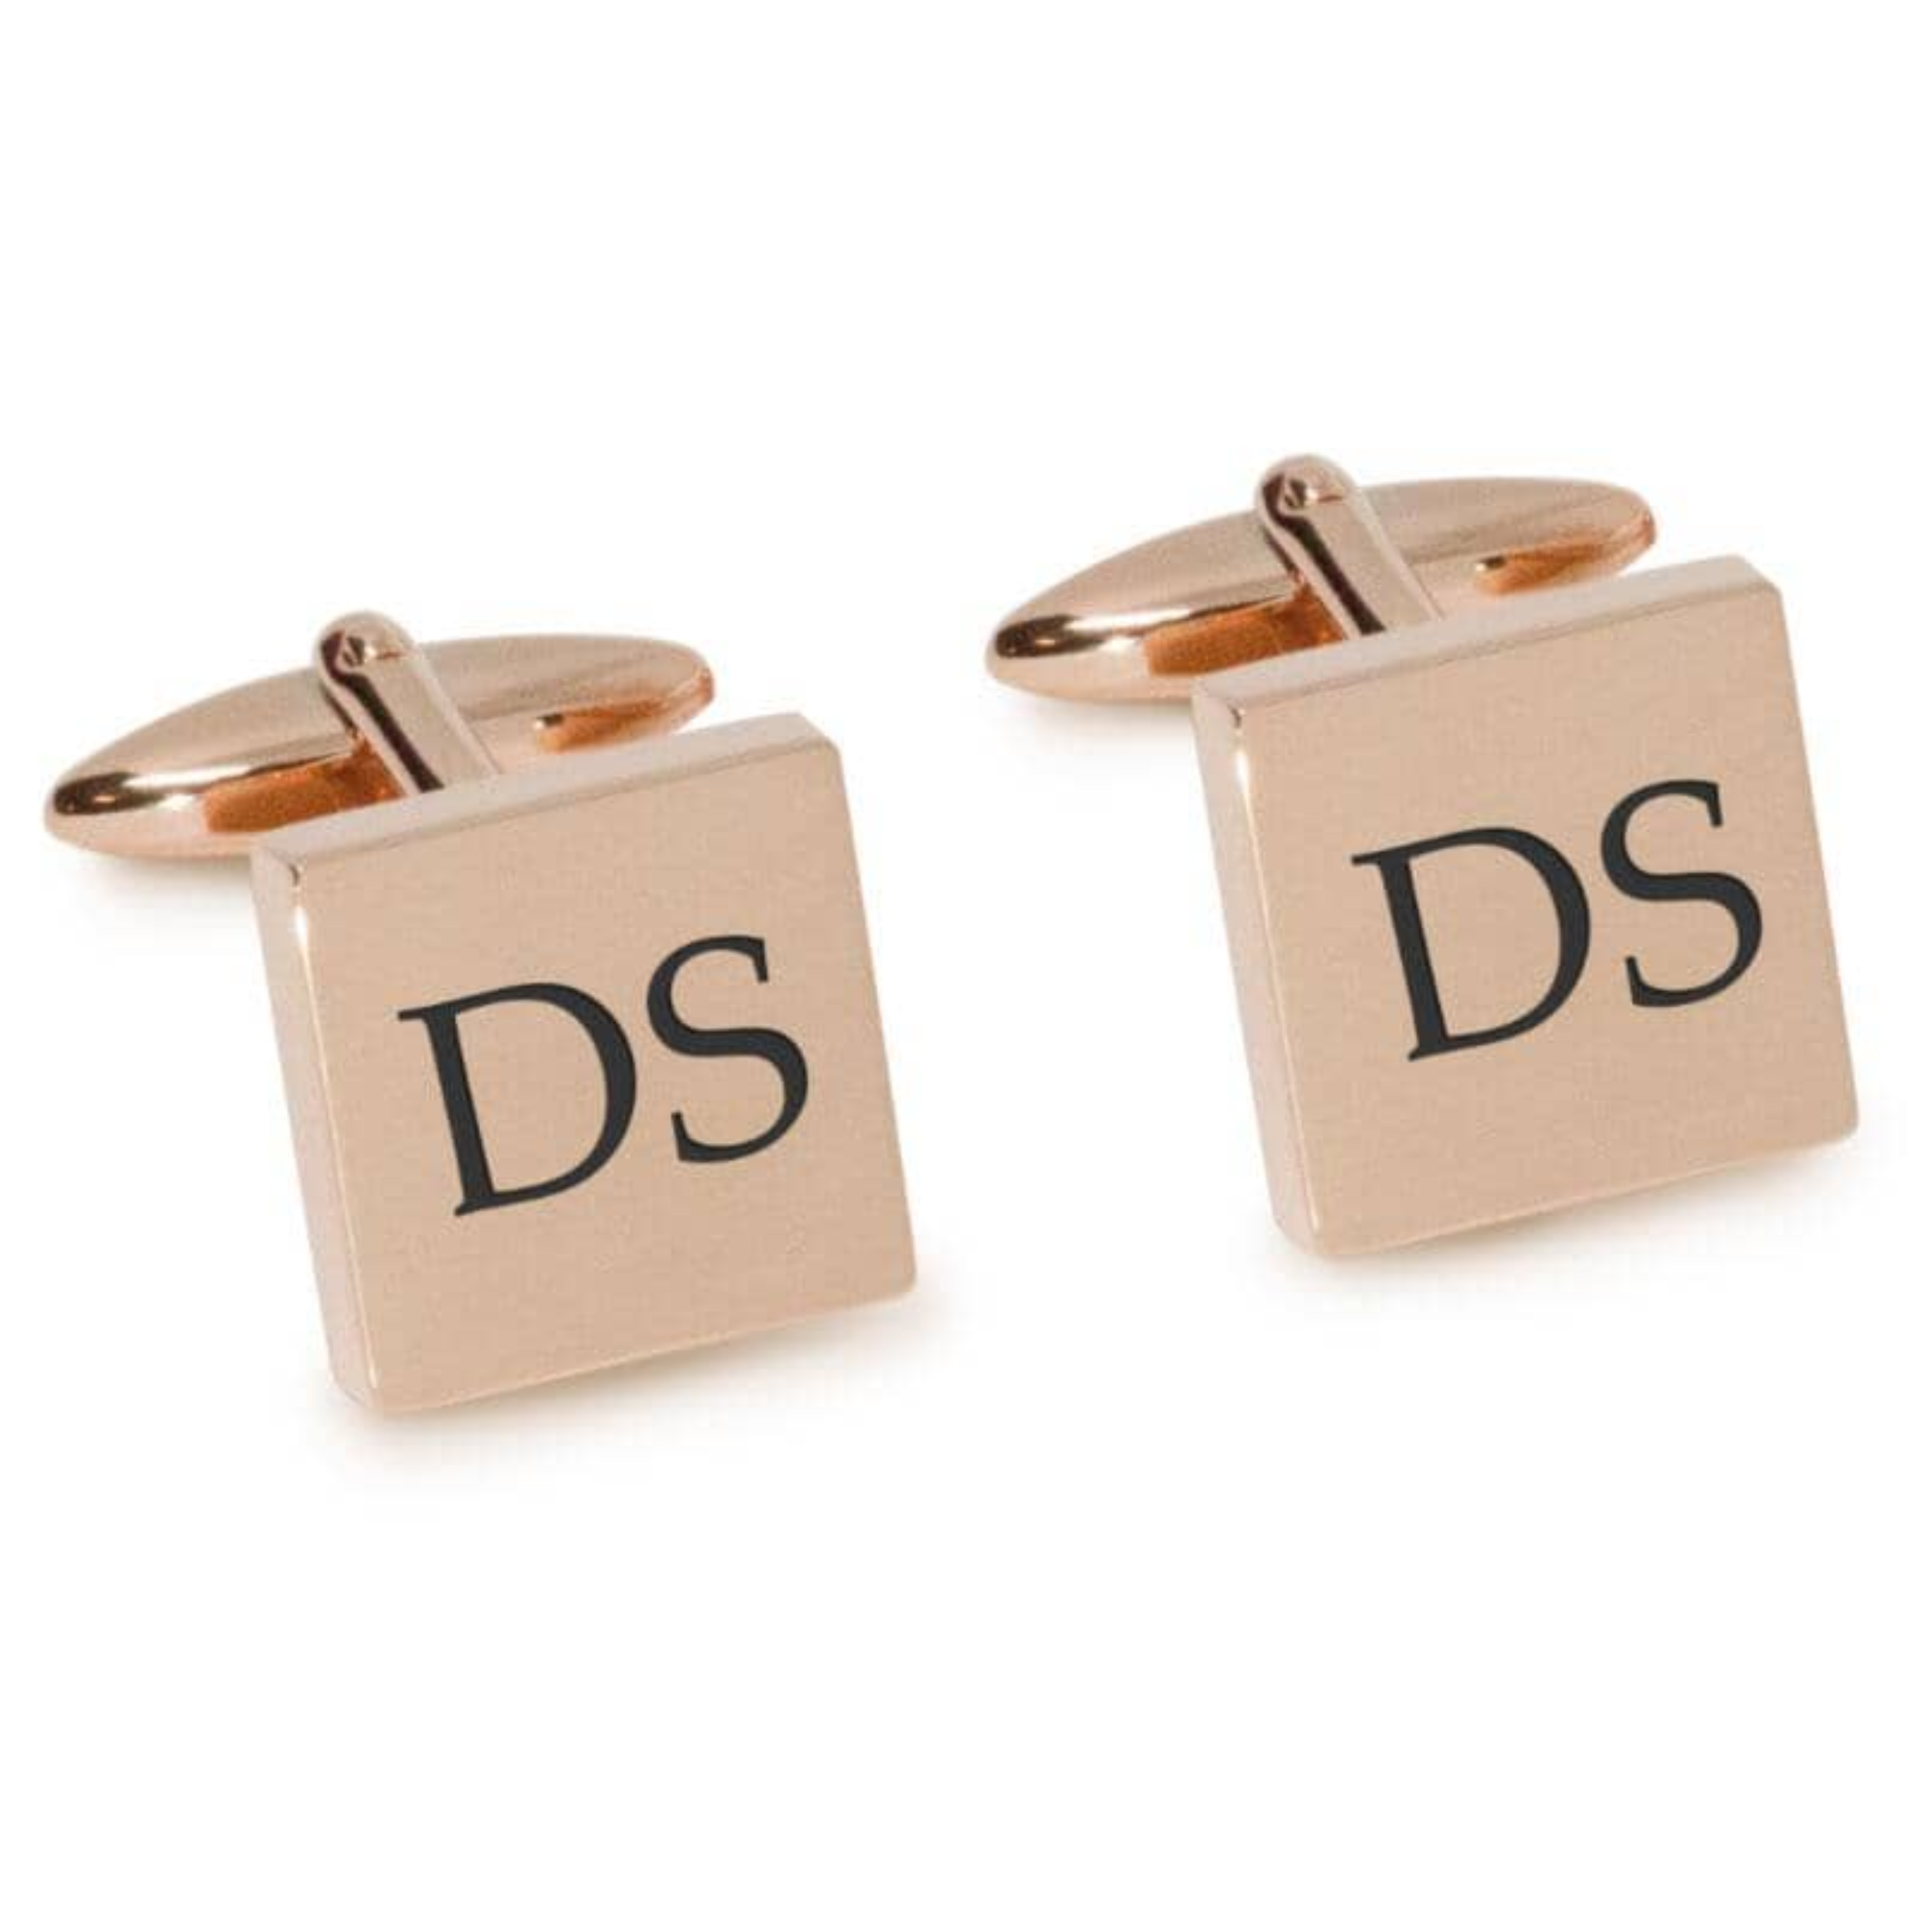 Two Initials Engraved Cufflinks in Rose Gold